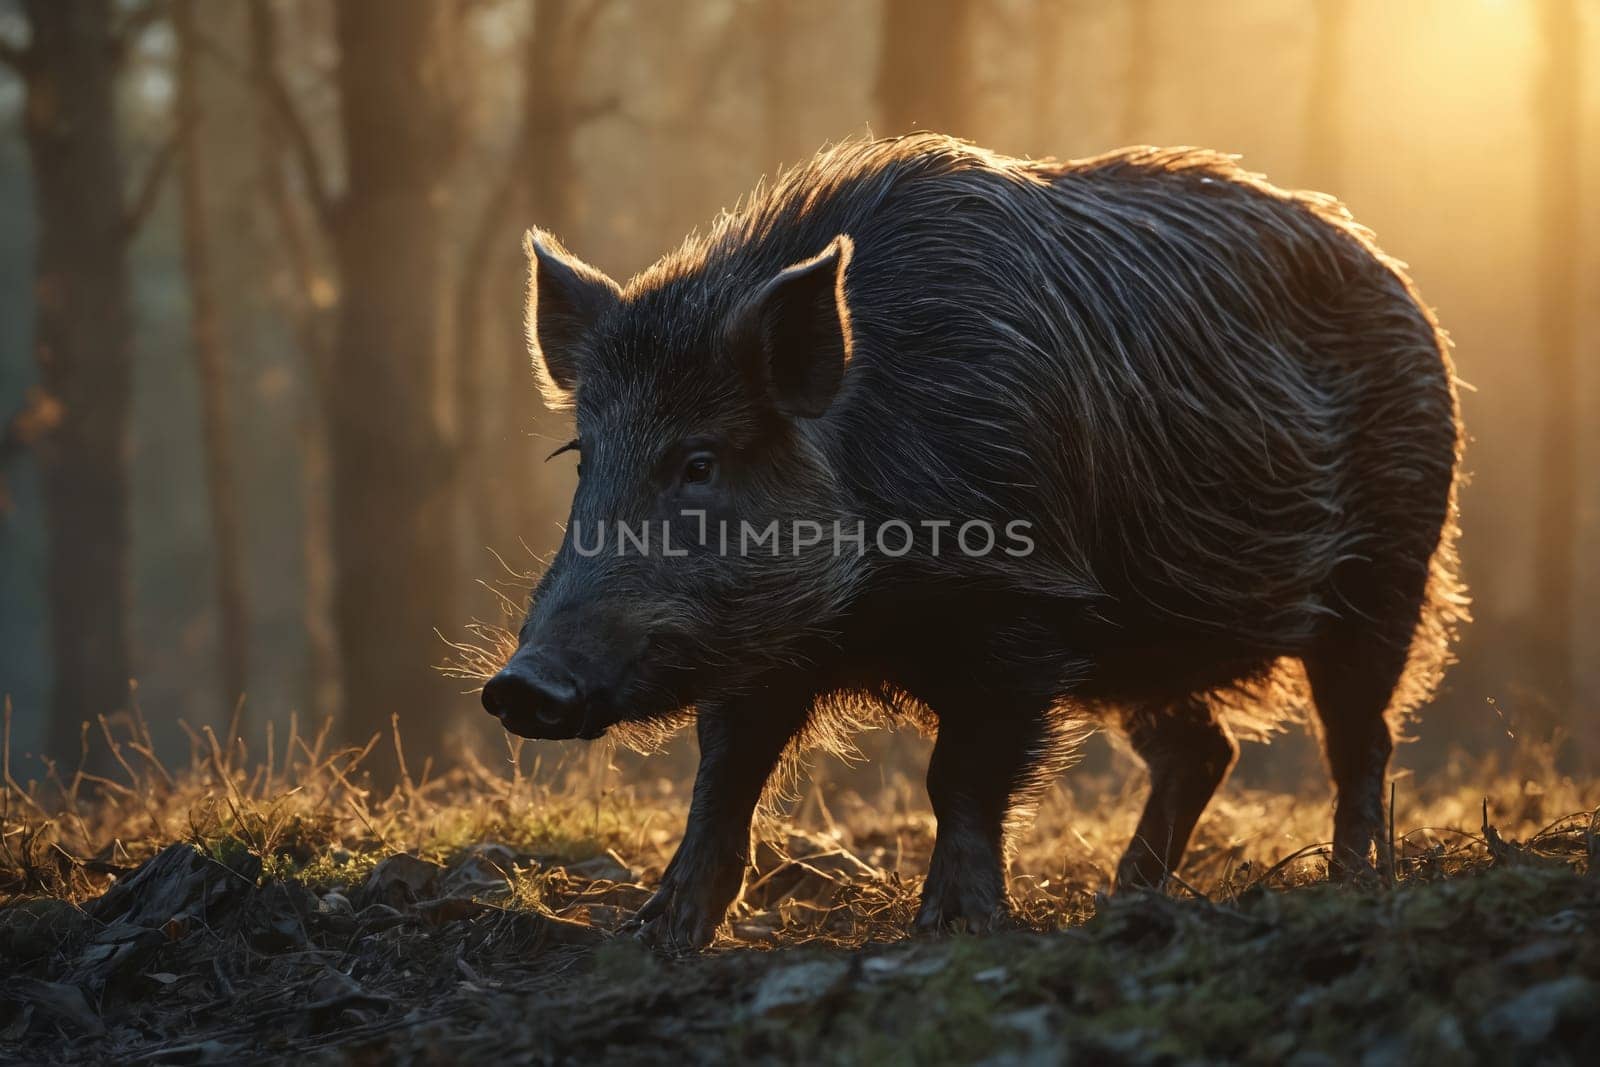 A wild boar looks curiously at the camera, illuminated by sunlight filtering through bare trees.